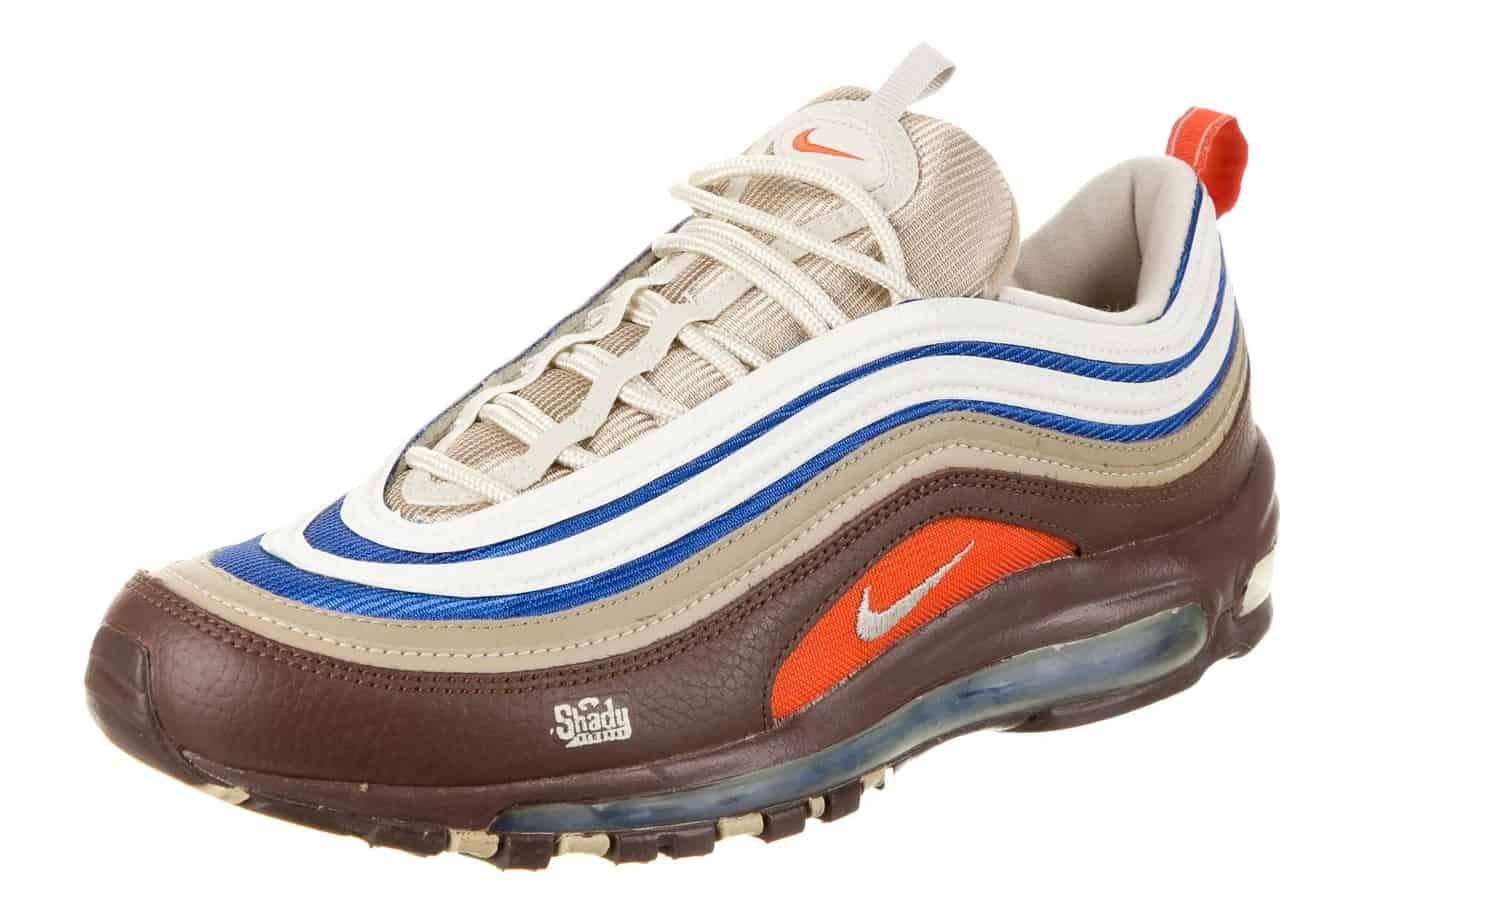 Eminem's Rare Shady Records Nike Air Max 97 Goes On Sale For A Massive Price